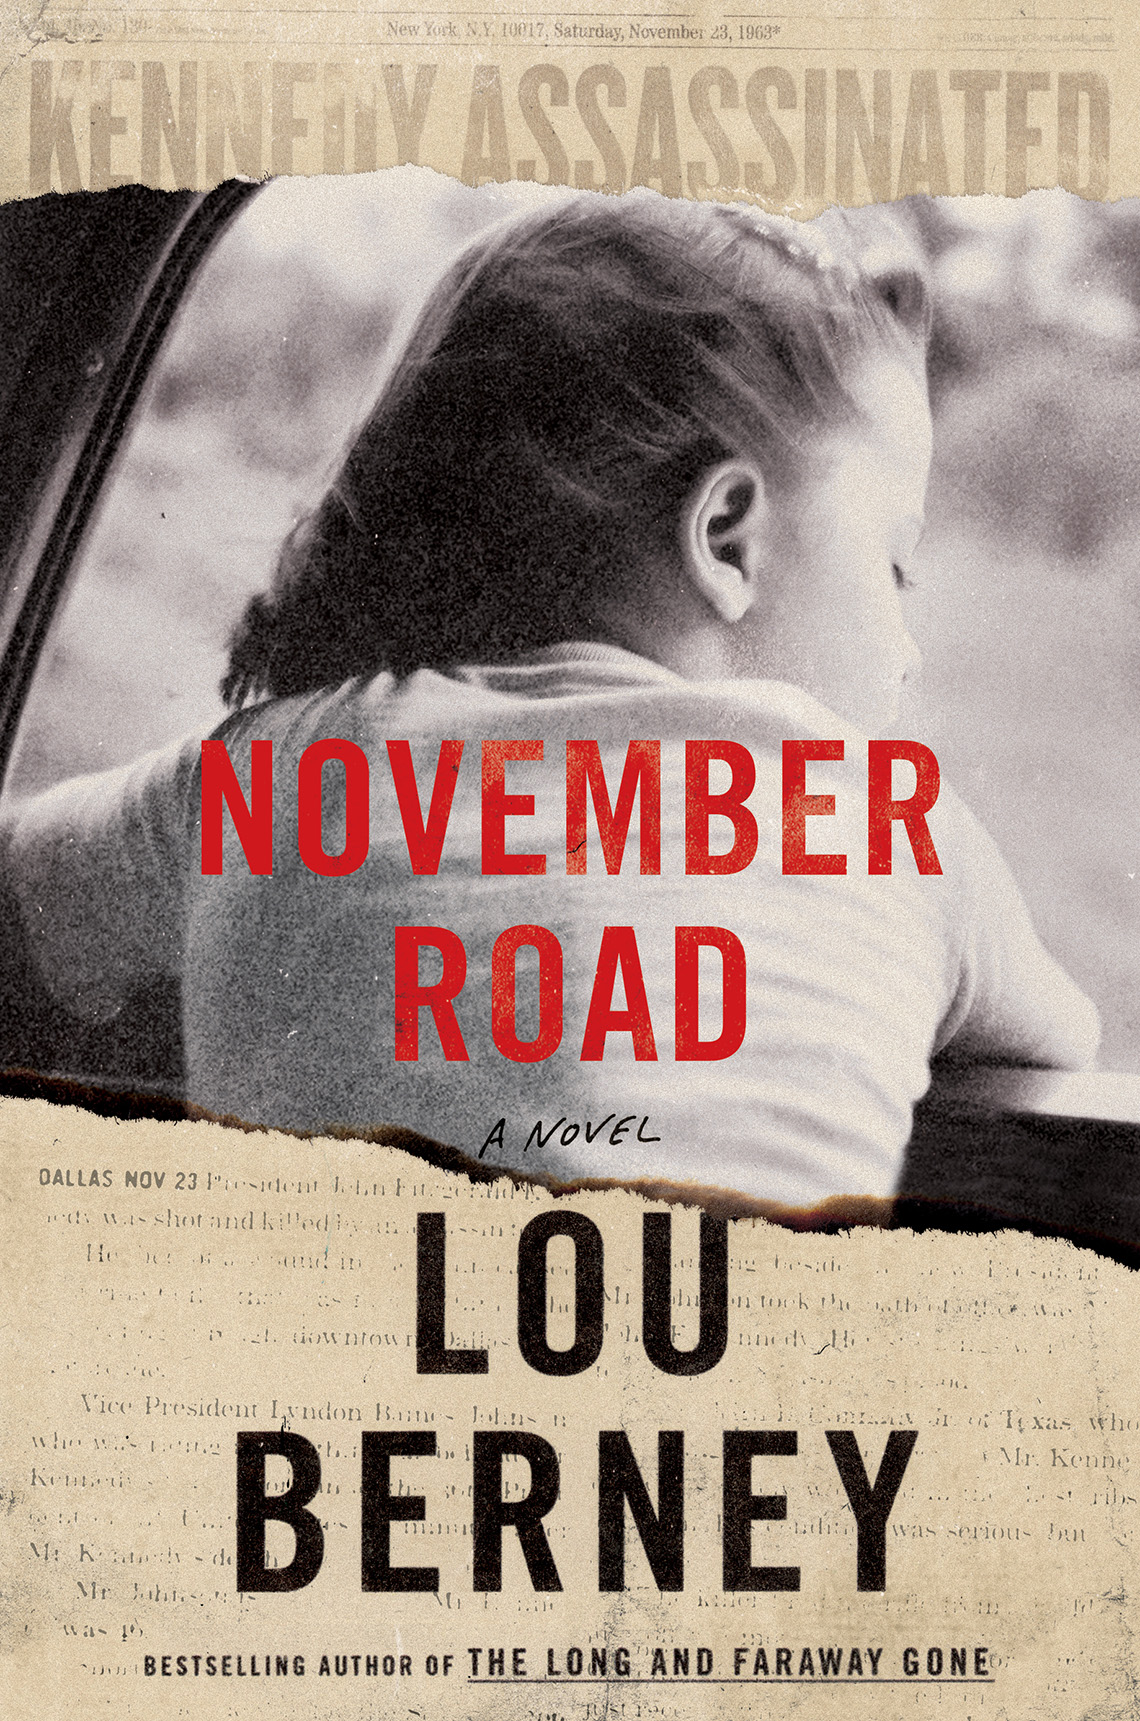 13 New Books for Fall in Fiction, Memoir and Biography